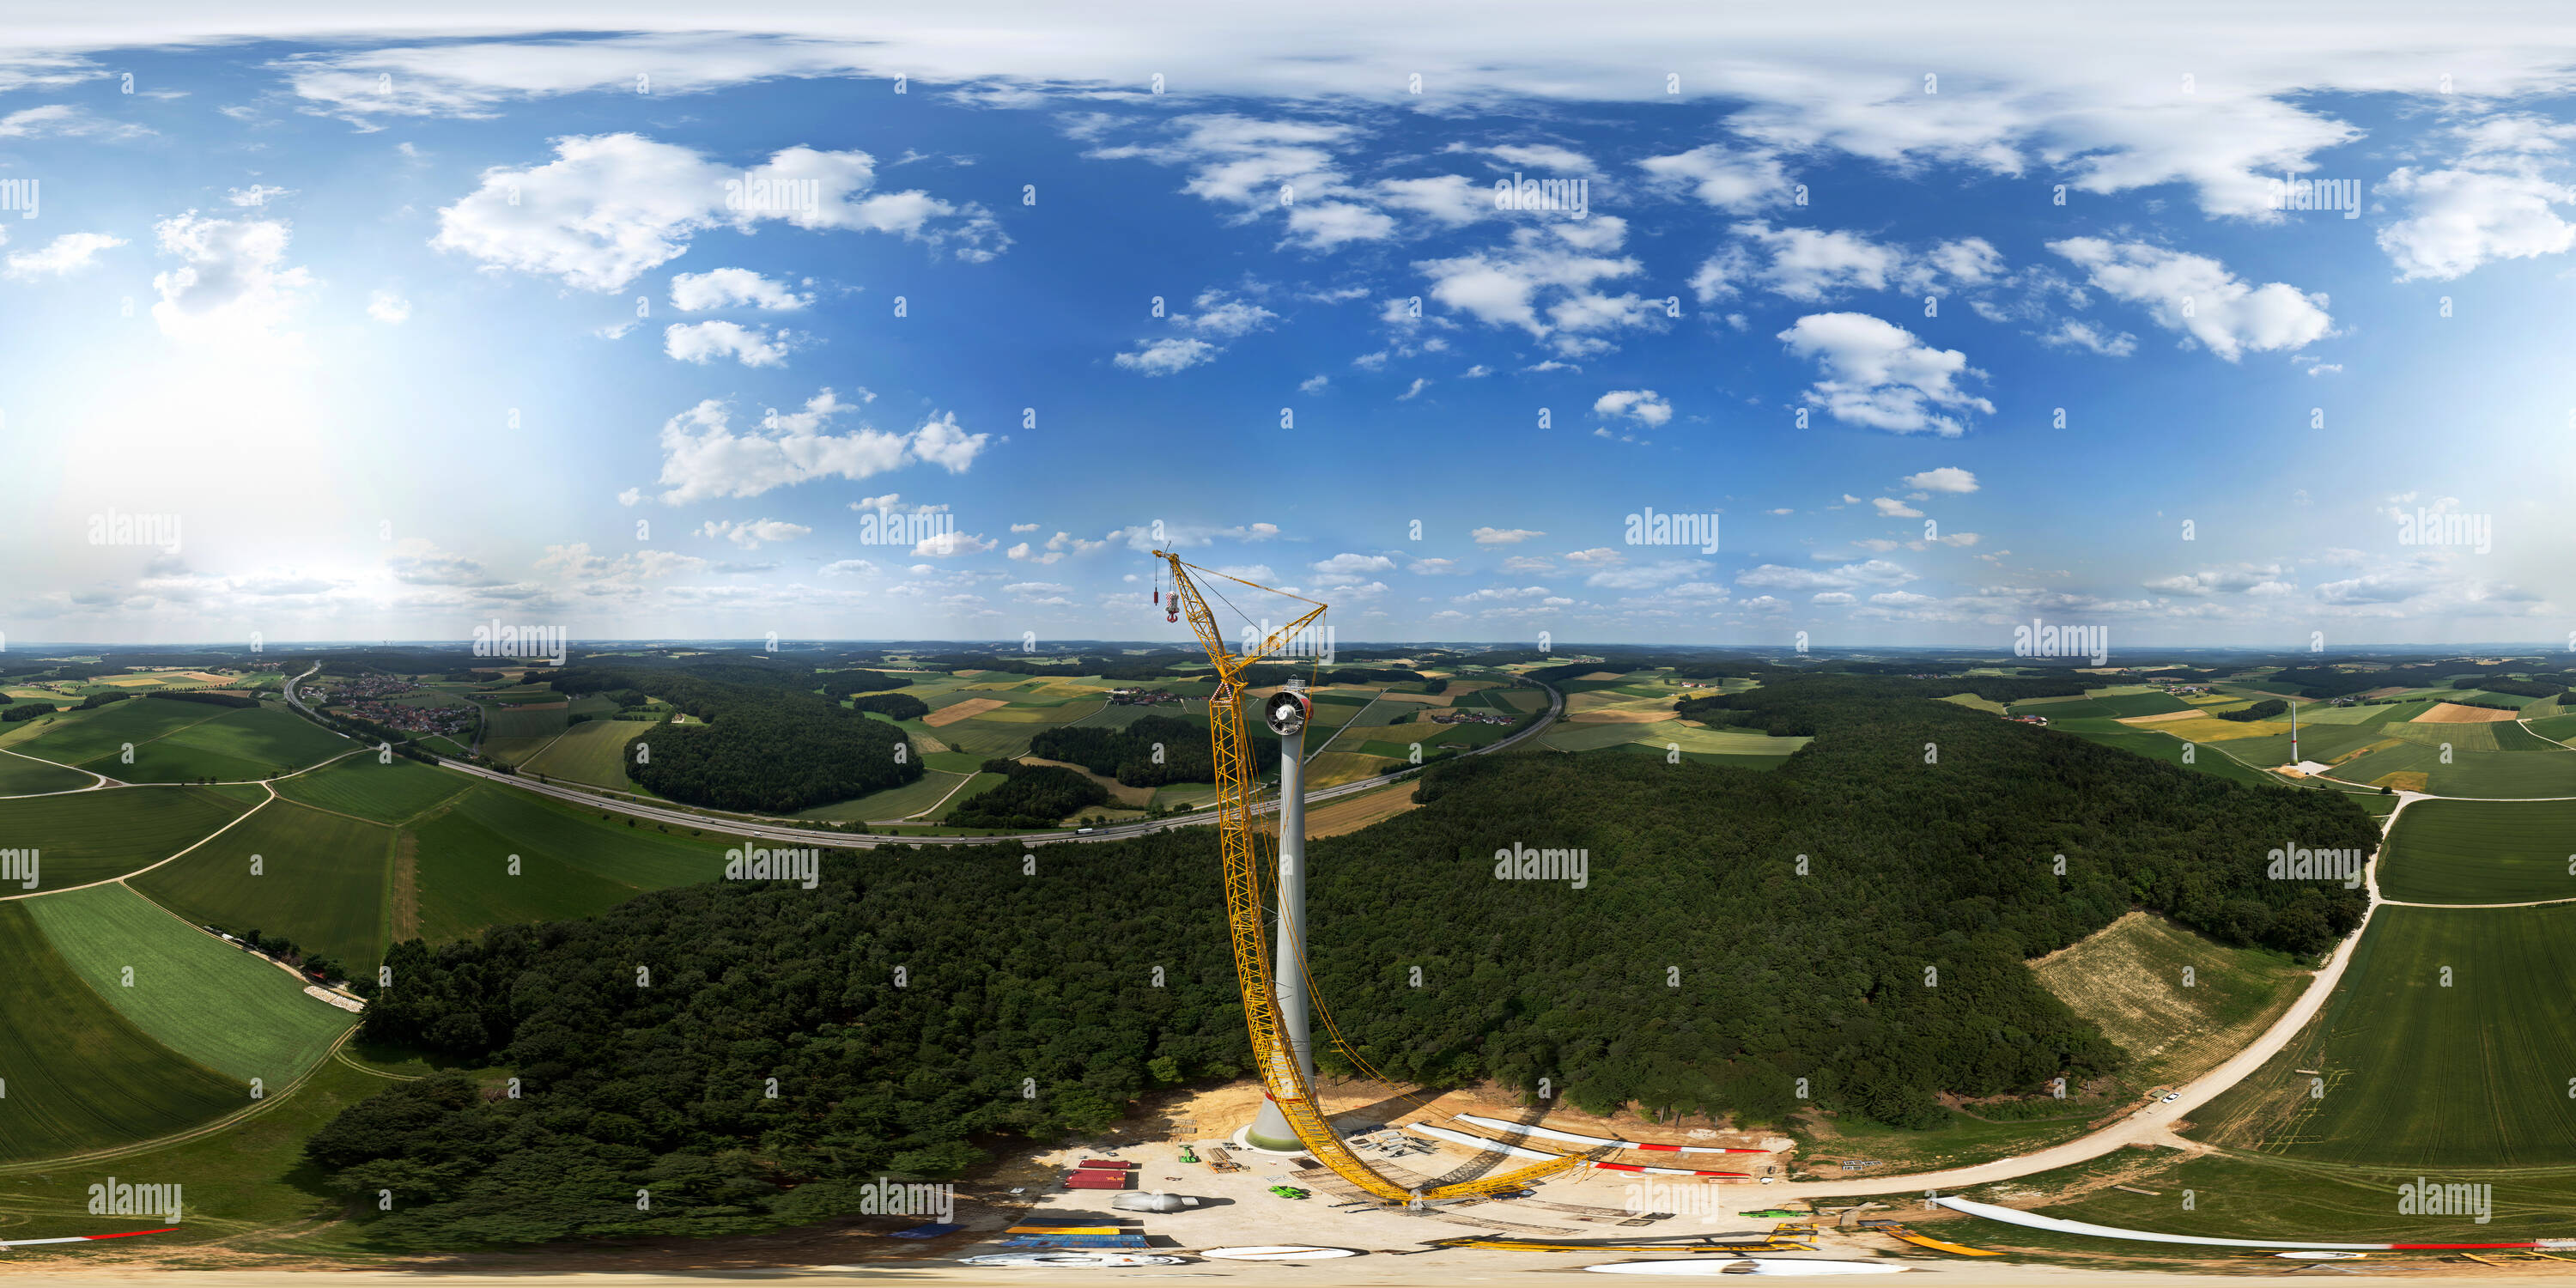 360 degree panoramic view of Wind Power Plant Brenntenberg II, Enercon E101, Aerial View